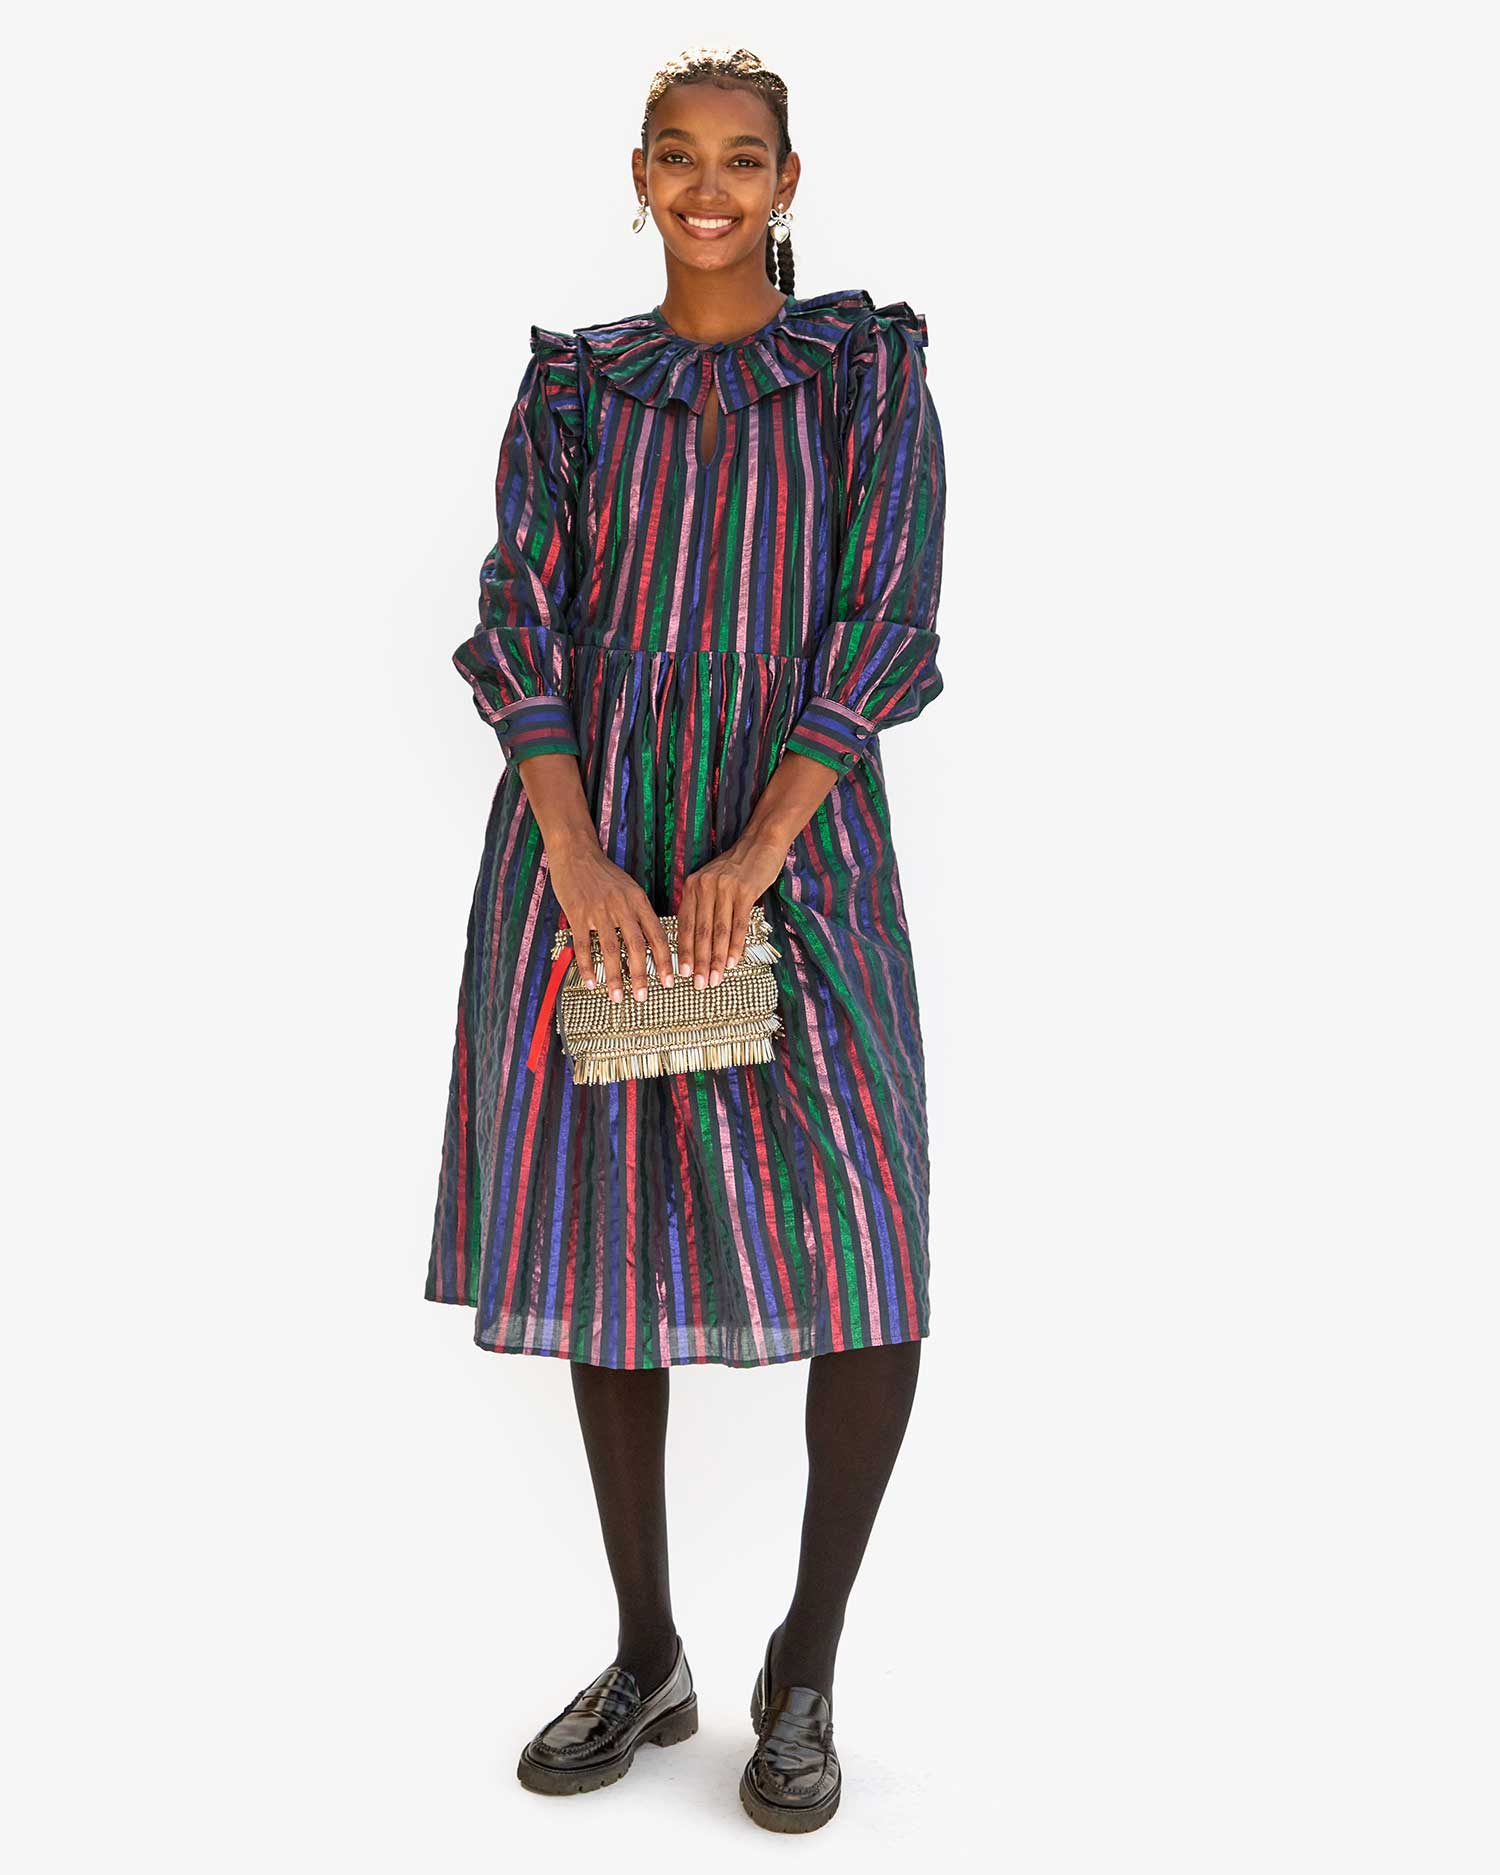 Jordan in the multi stripe leonie dress with loafers and tights. she's holding the Silver Beaded Fringe Estelle as a clutch